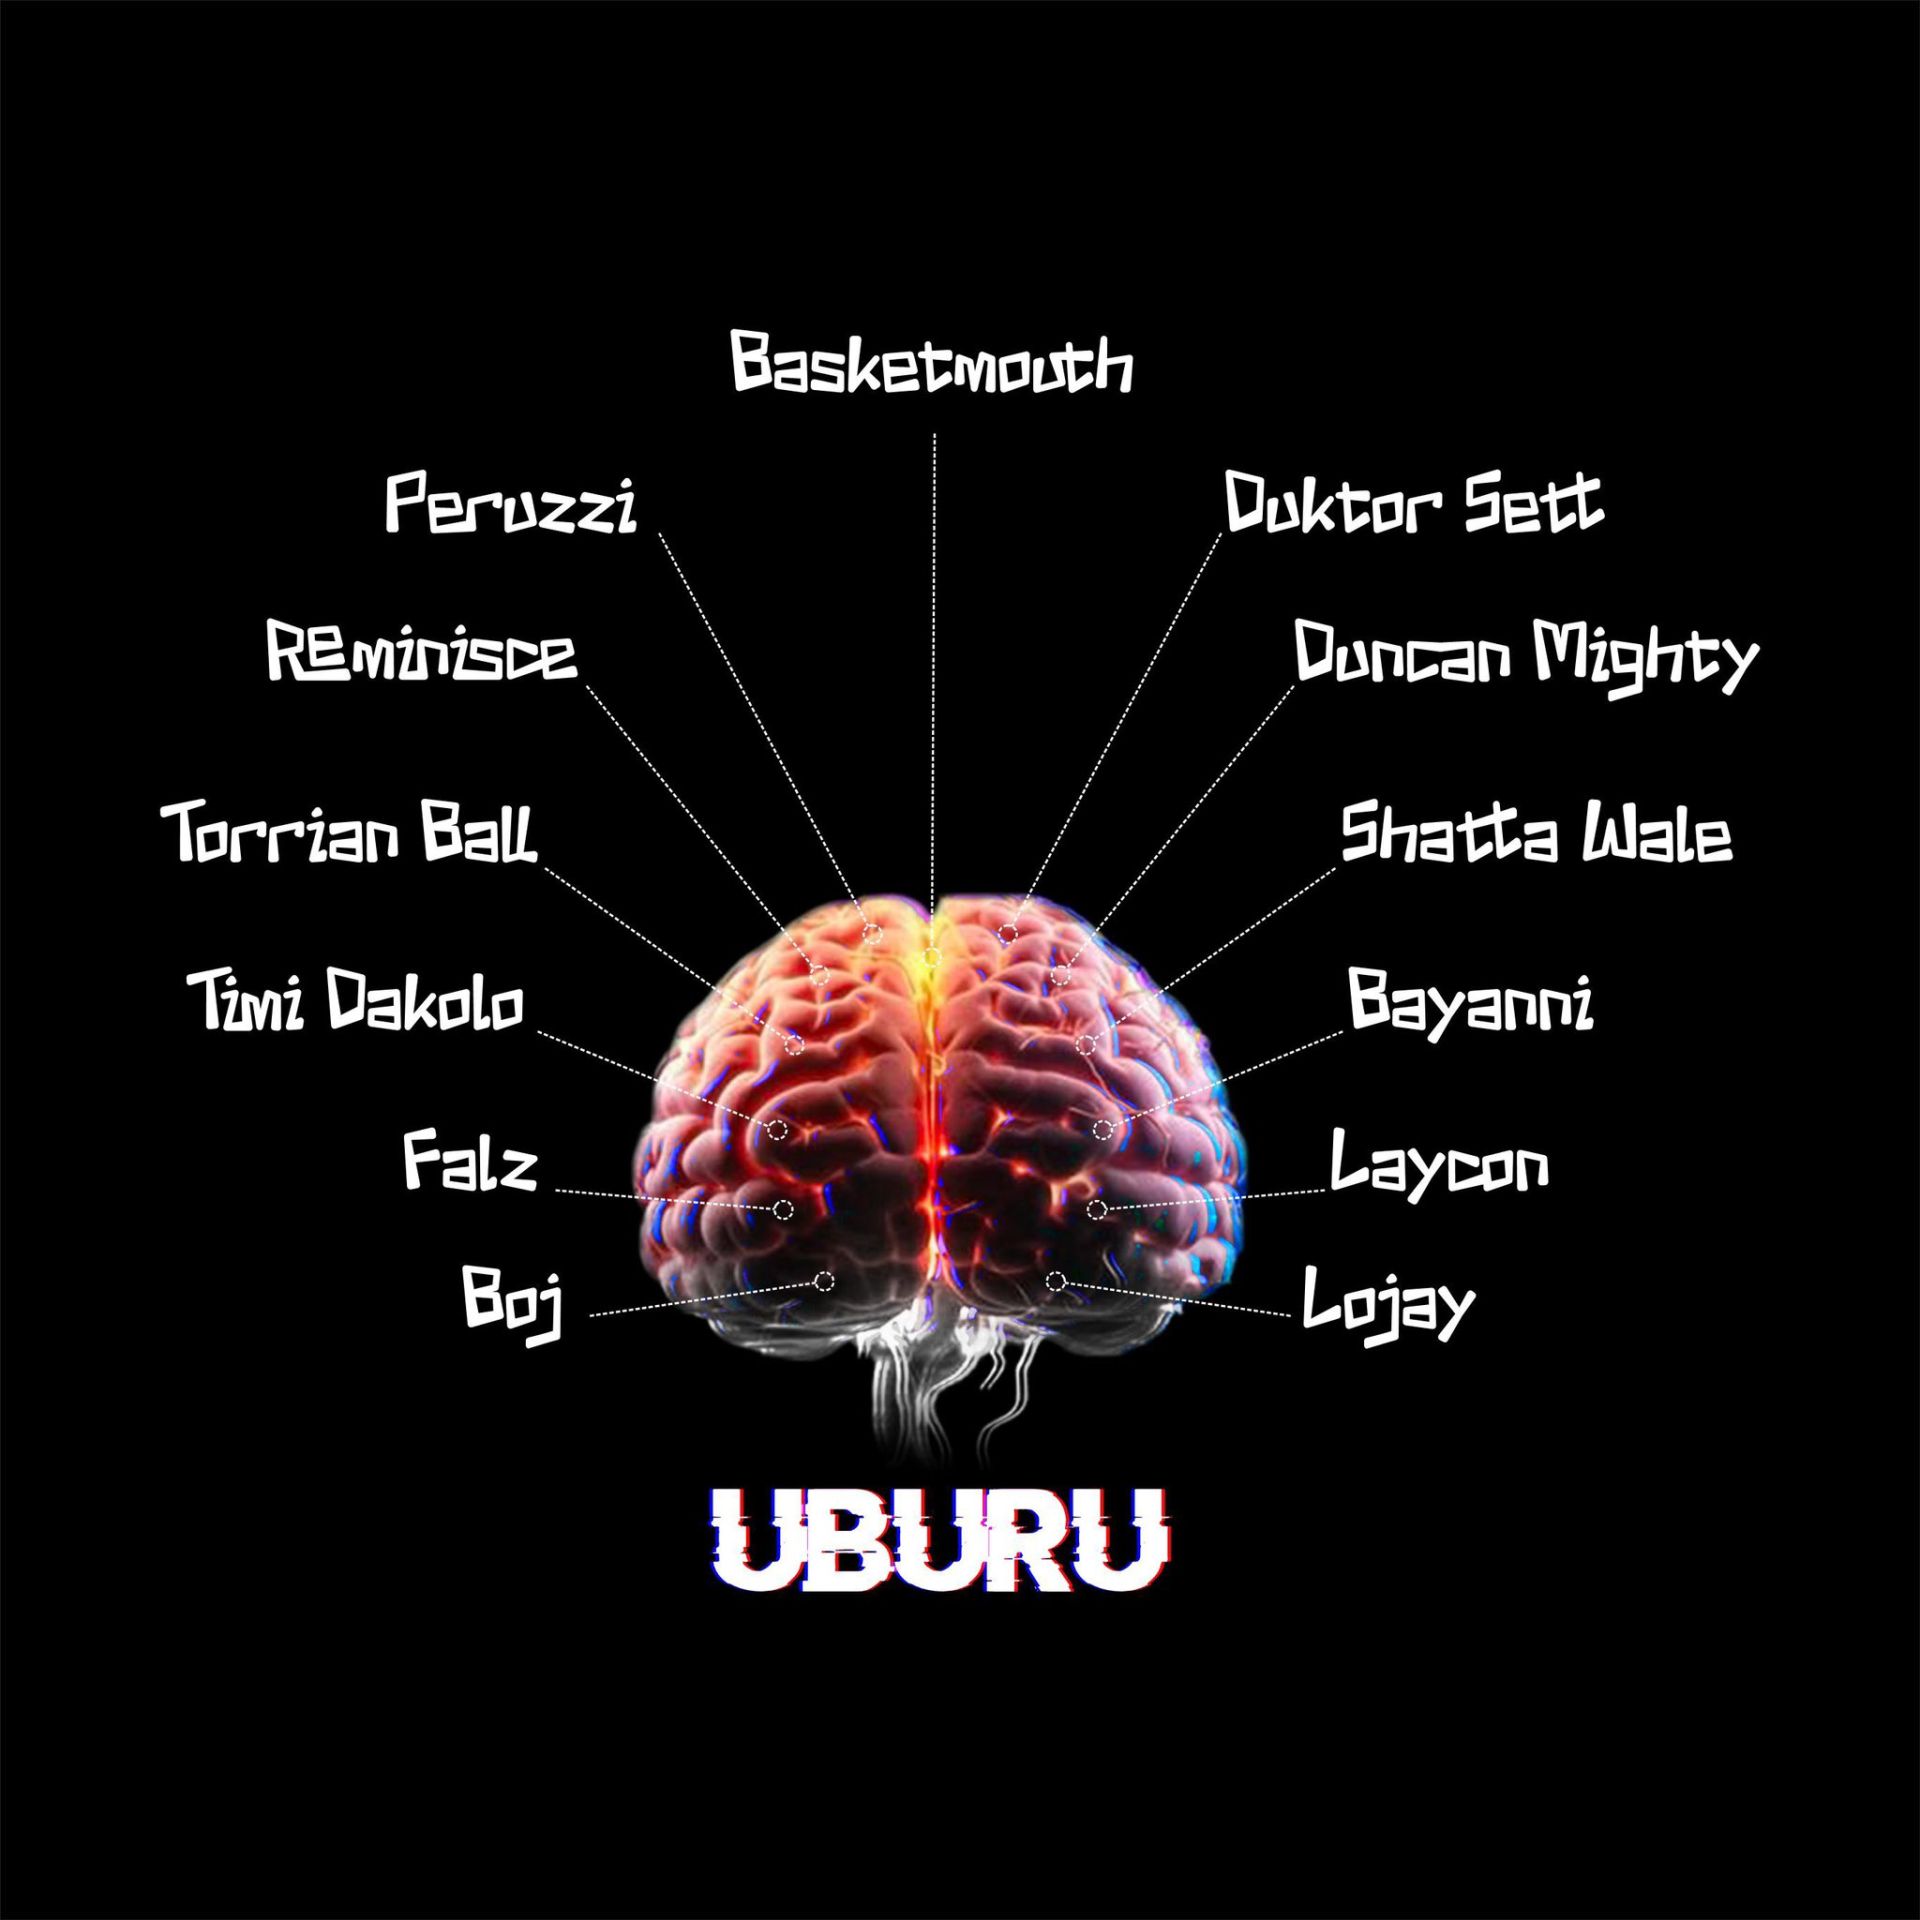 Basketmouth Unveils New Album ‘Uburu’ with Star-Studded Lineup and Special Guest Shatta Wale